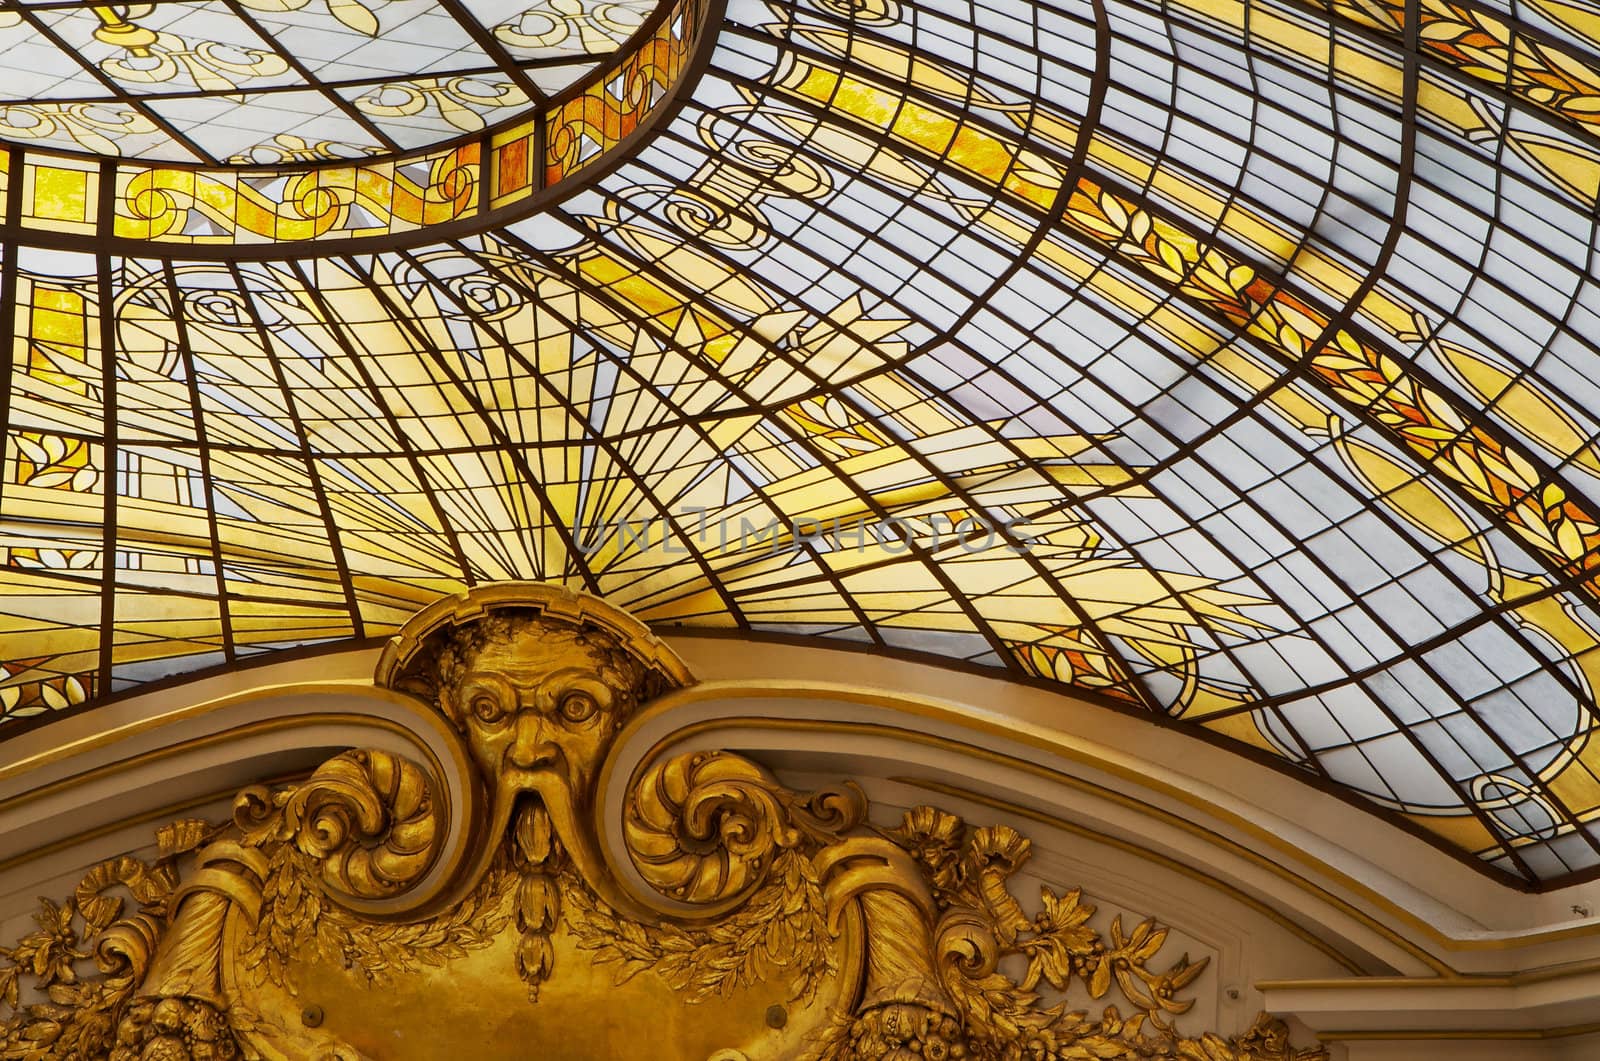 Gold colored stained glass windows as part of a domed cieling